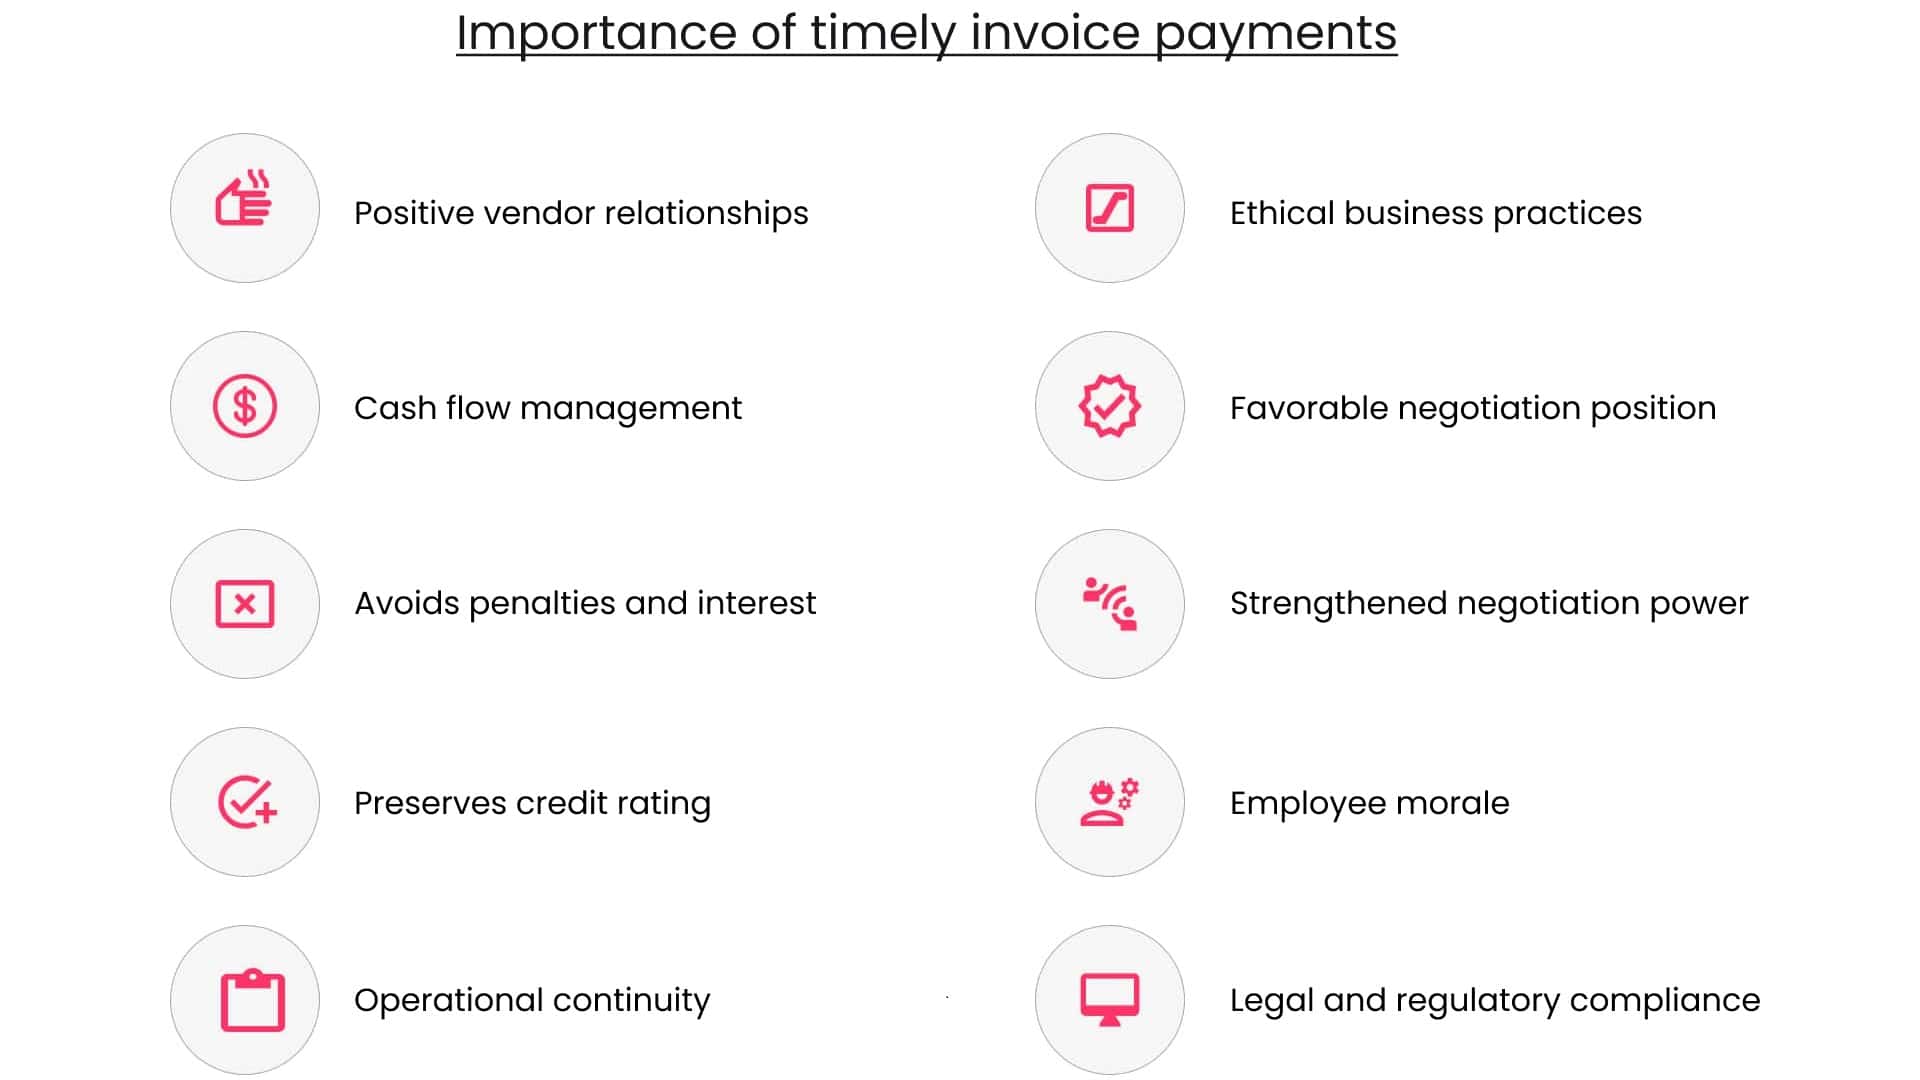 Timely invoice payments